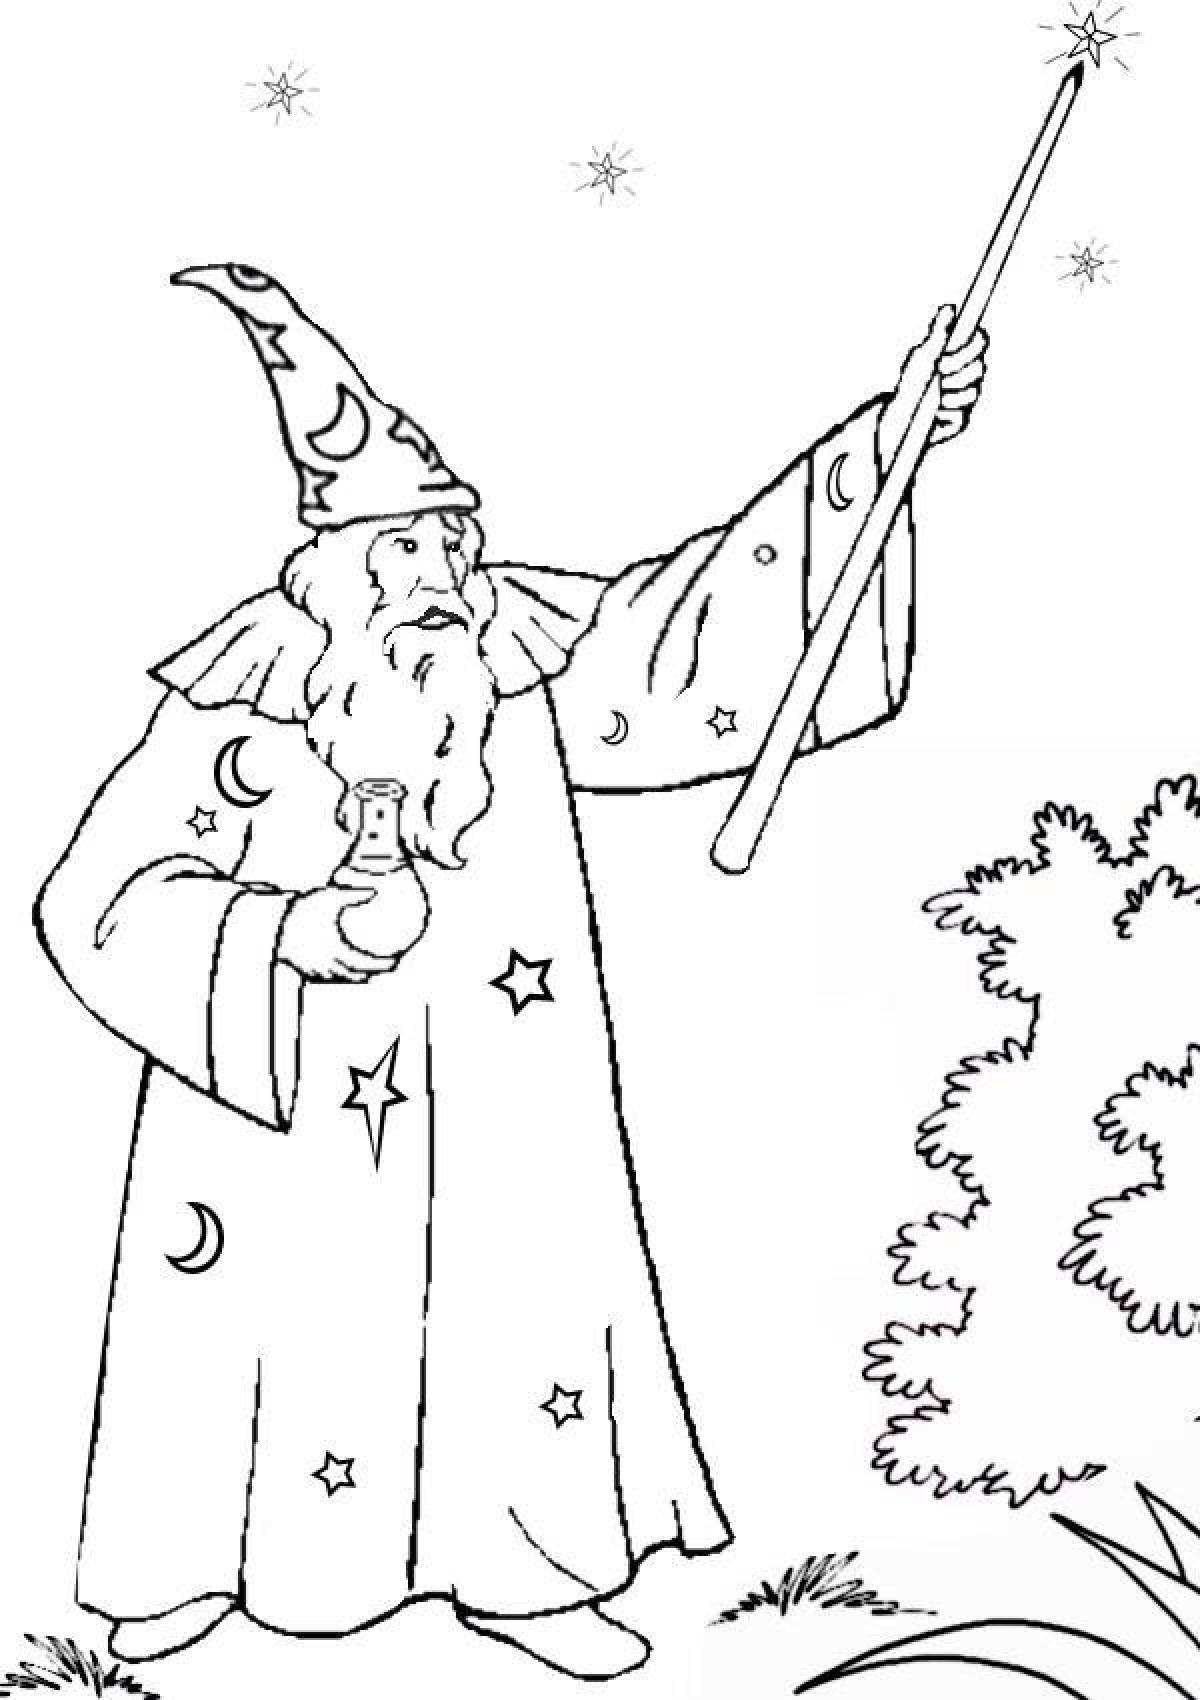 Wizard coloring page